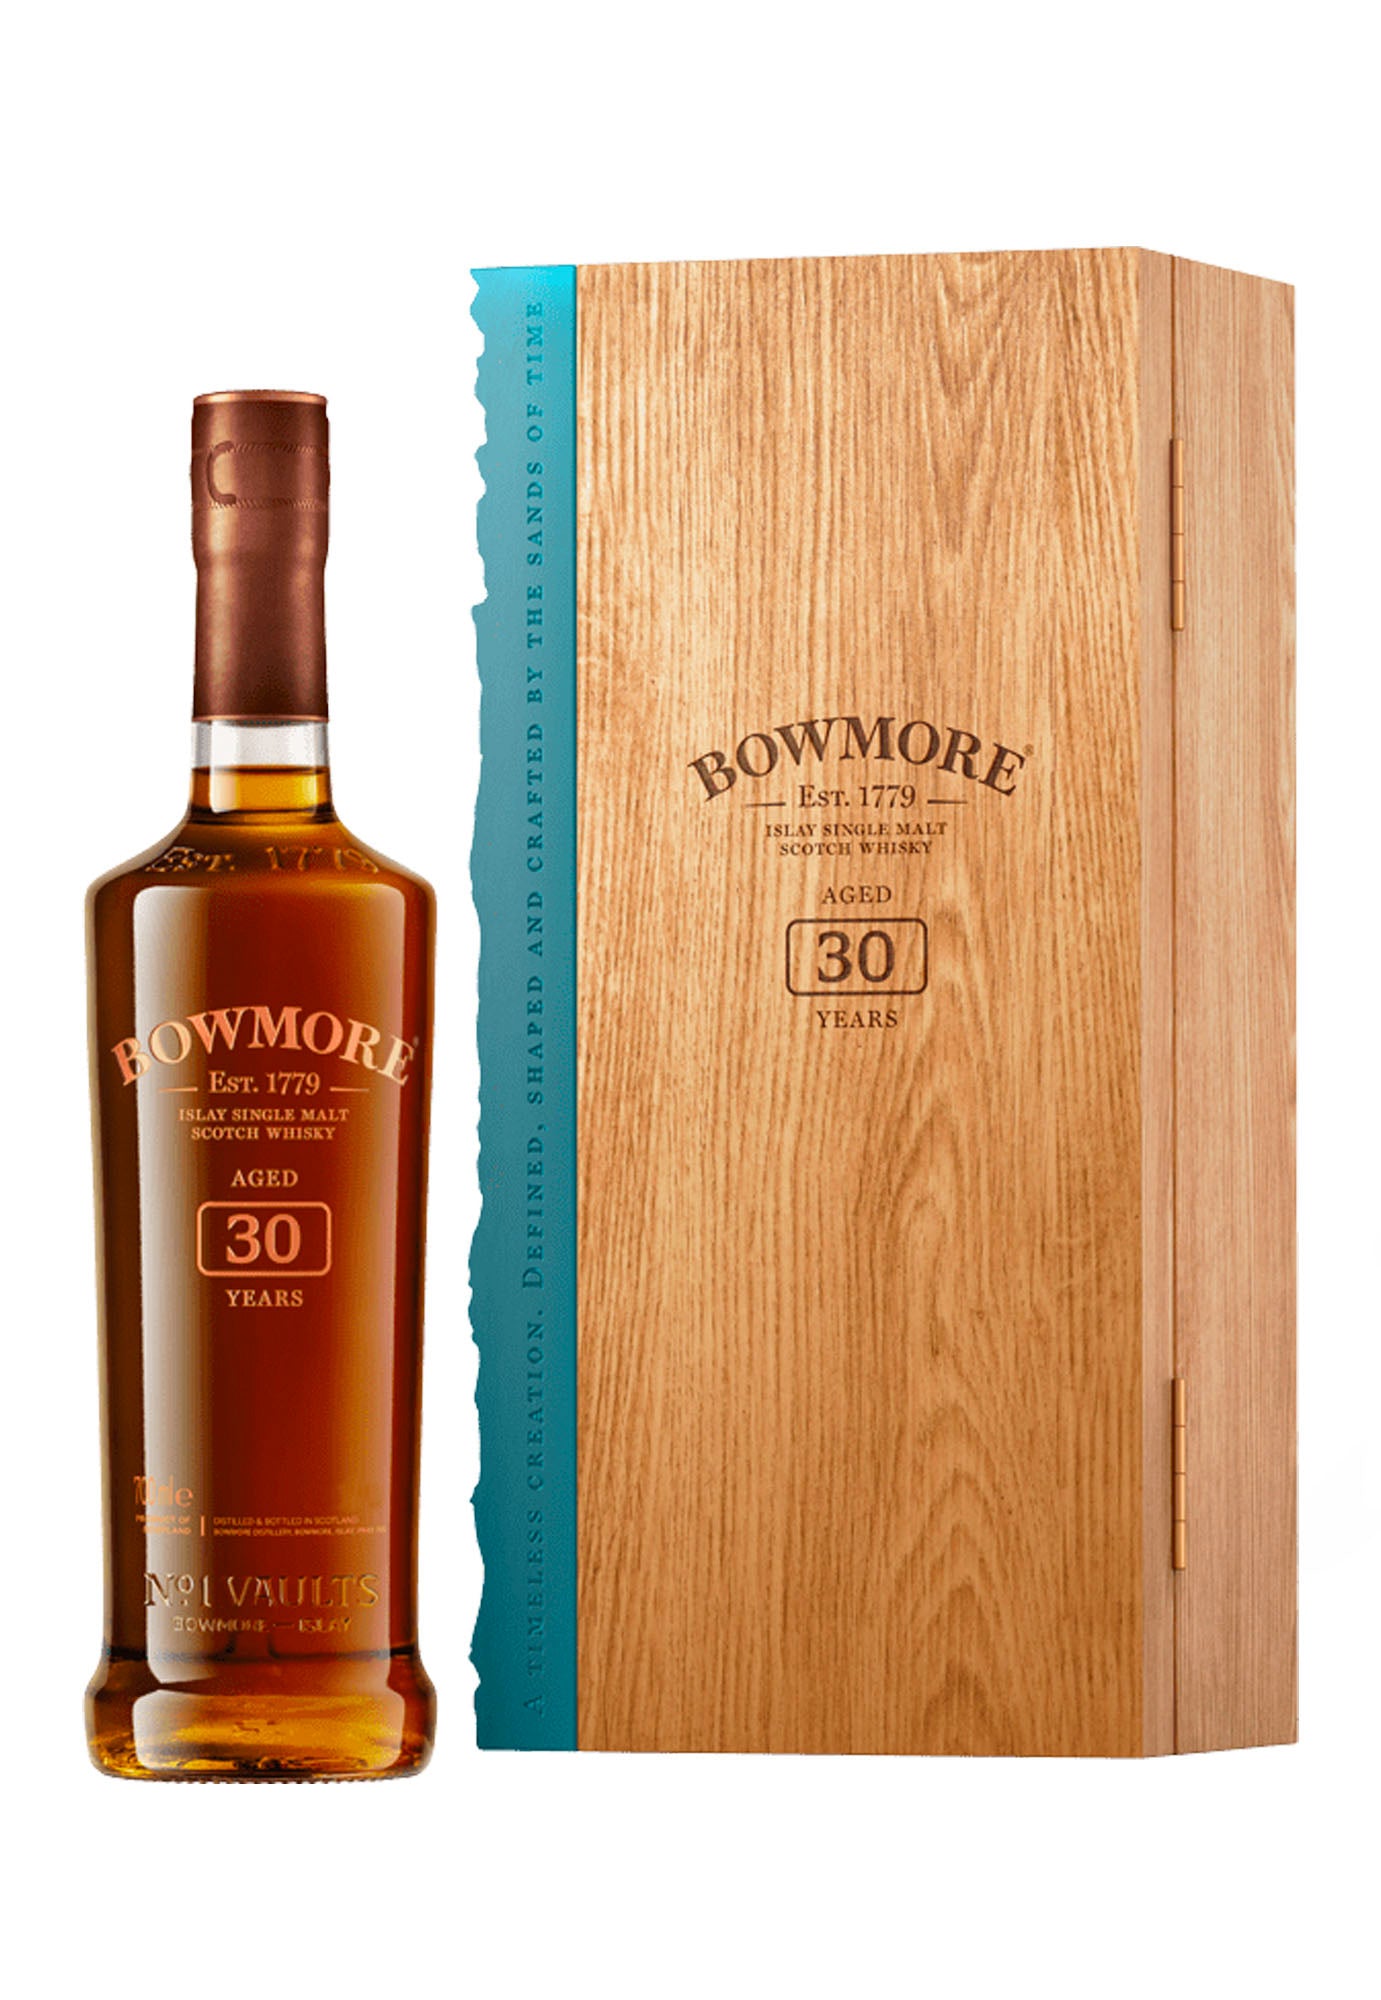 Bowmore 30 Year Old - 2020 Release